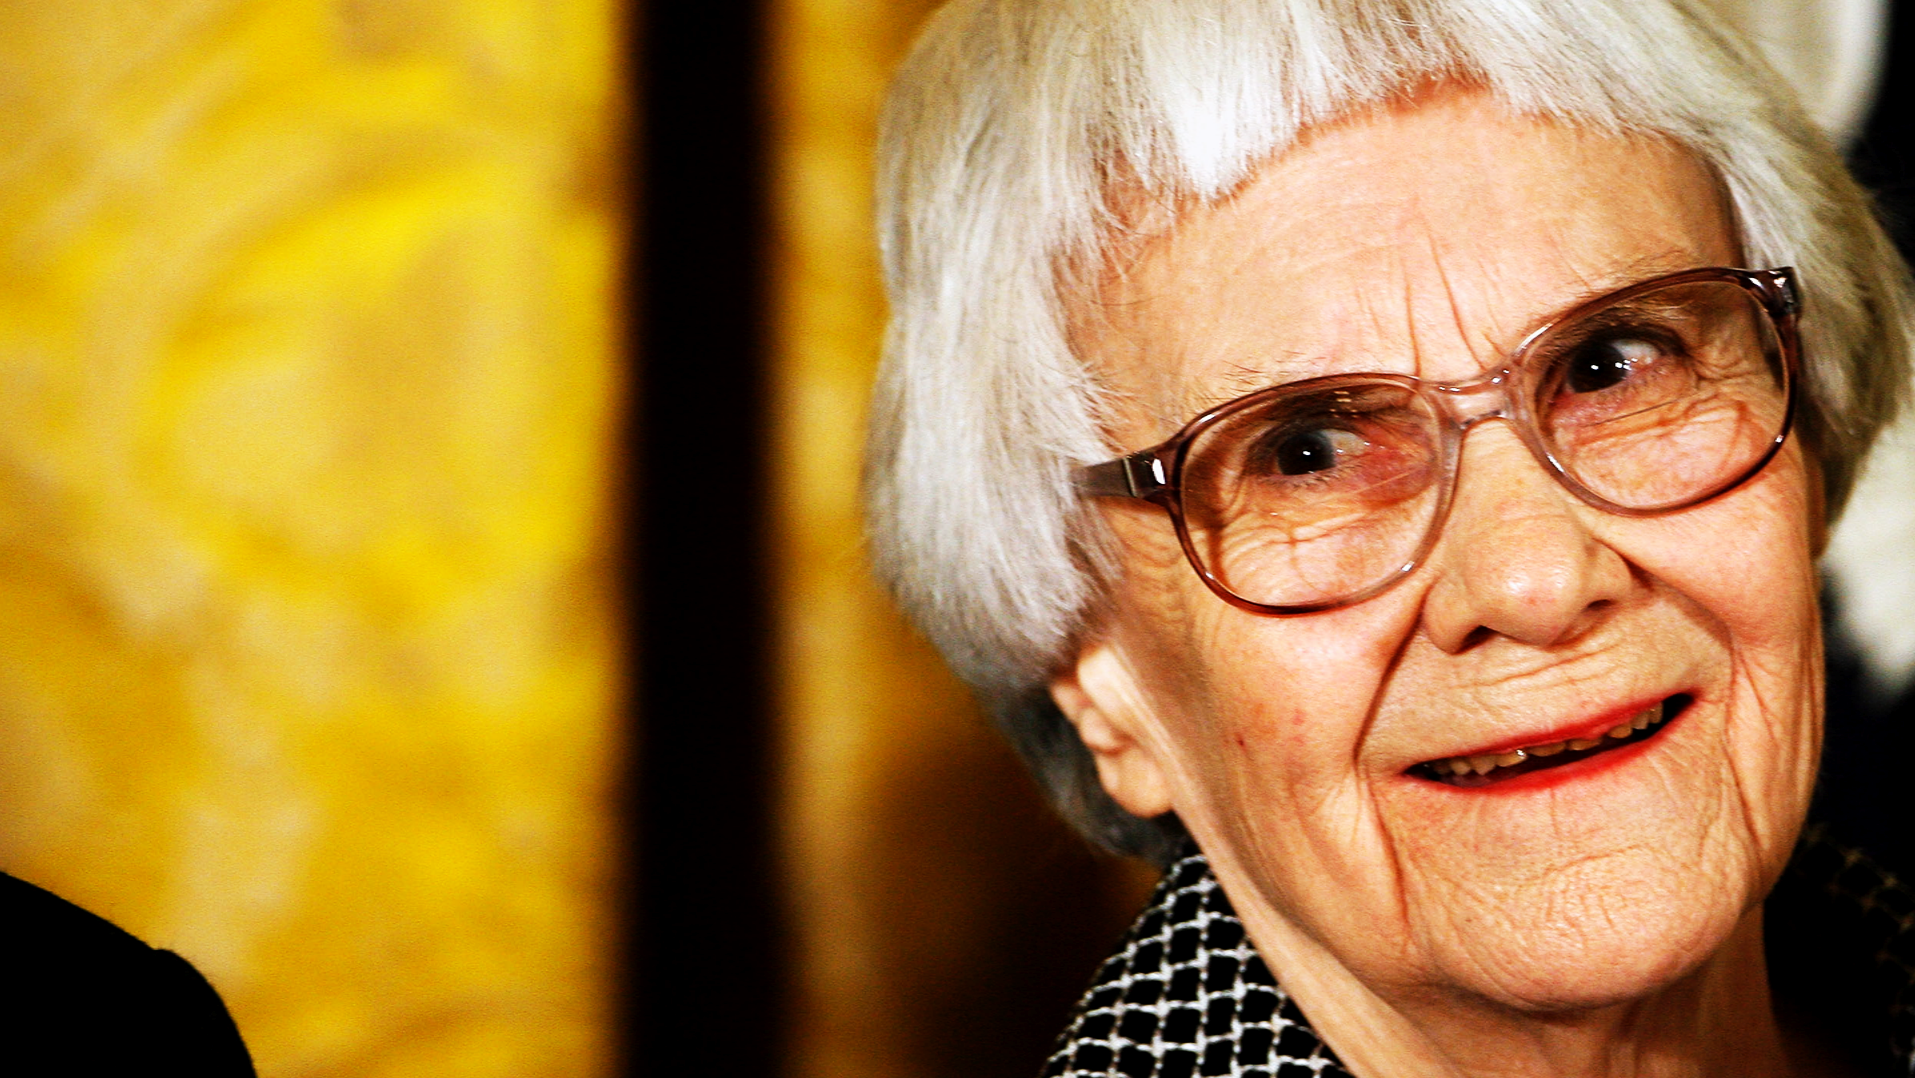 Questions have been raised about the "To Kill a Mockingbird" author's ability to consent to publishing another book. 